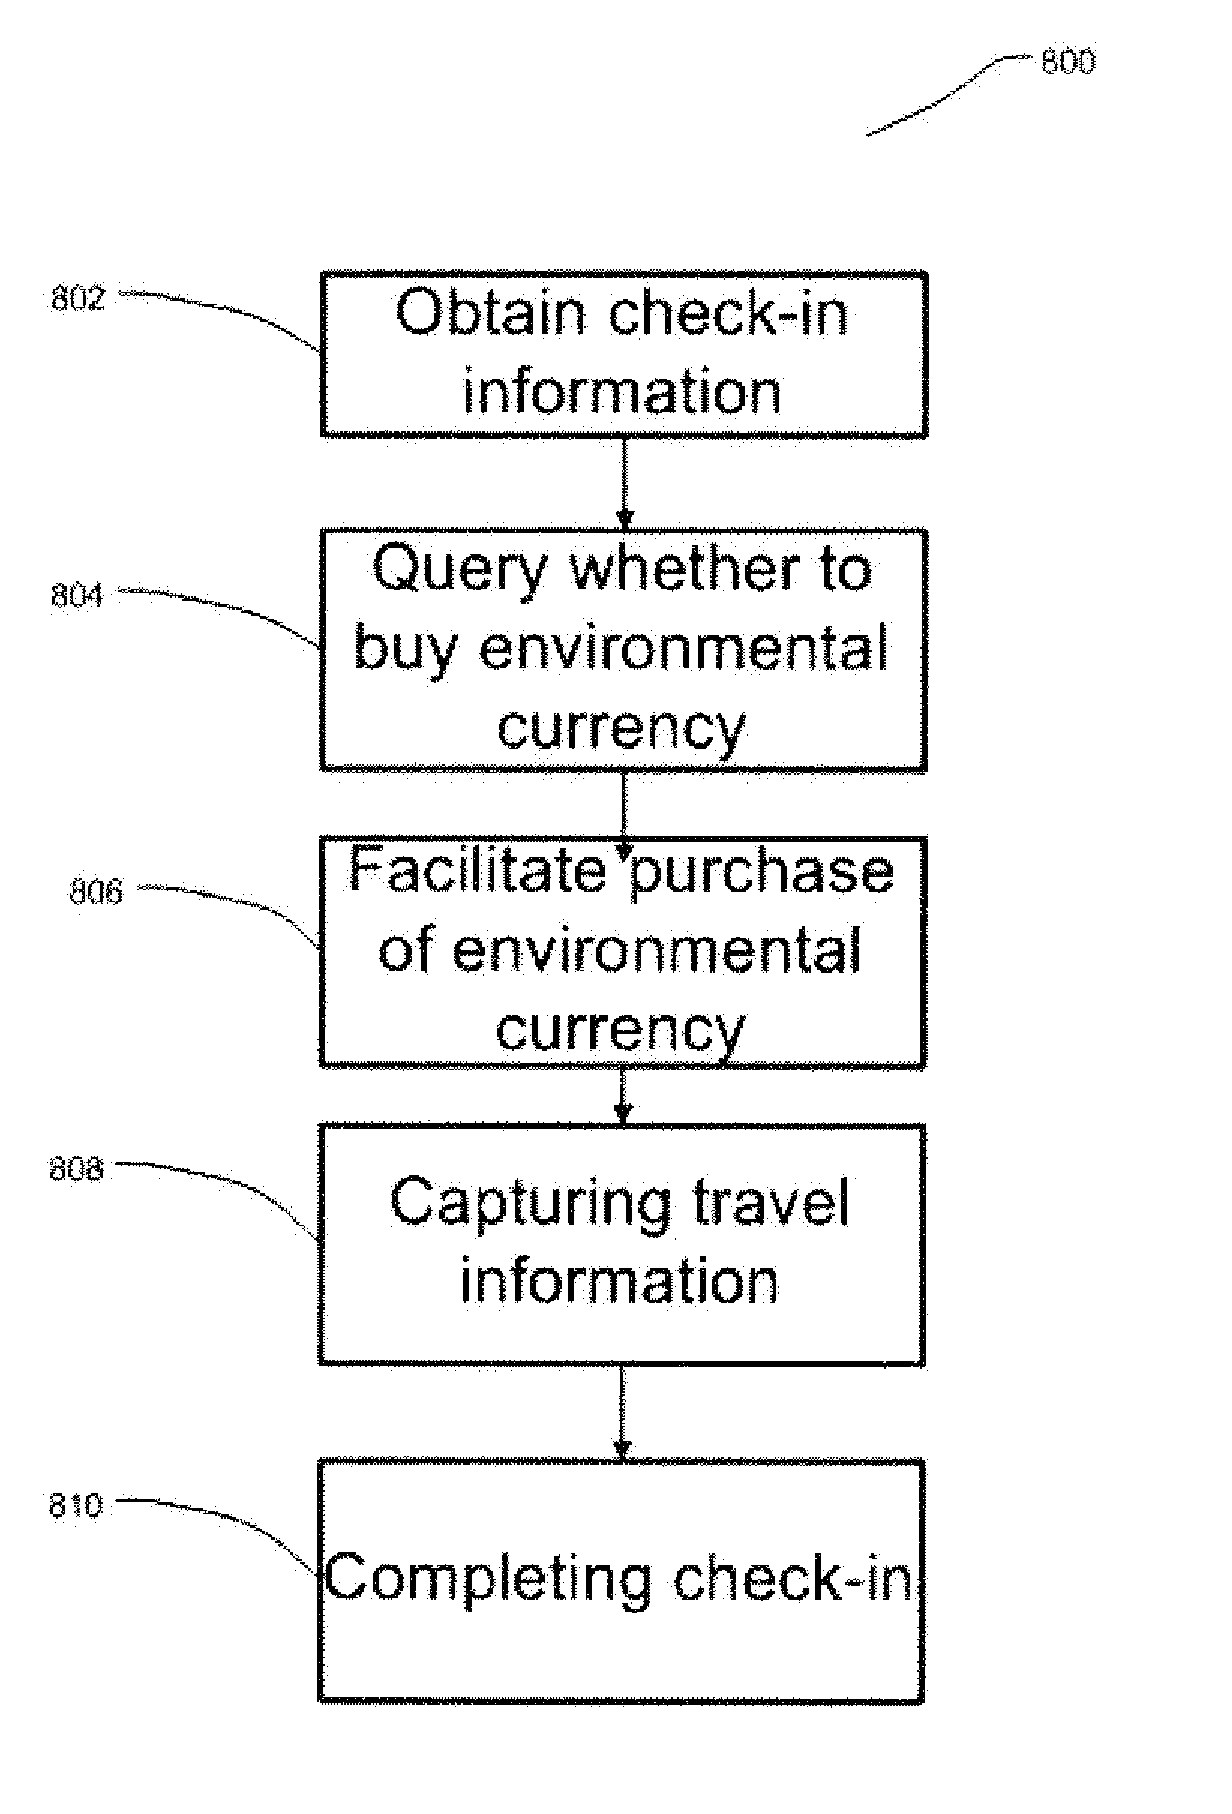 Systems and methods for environmental currency purchasing and tracking